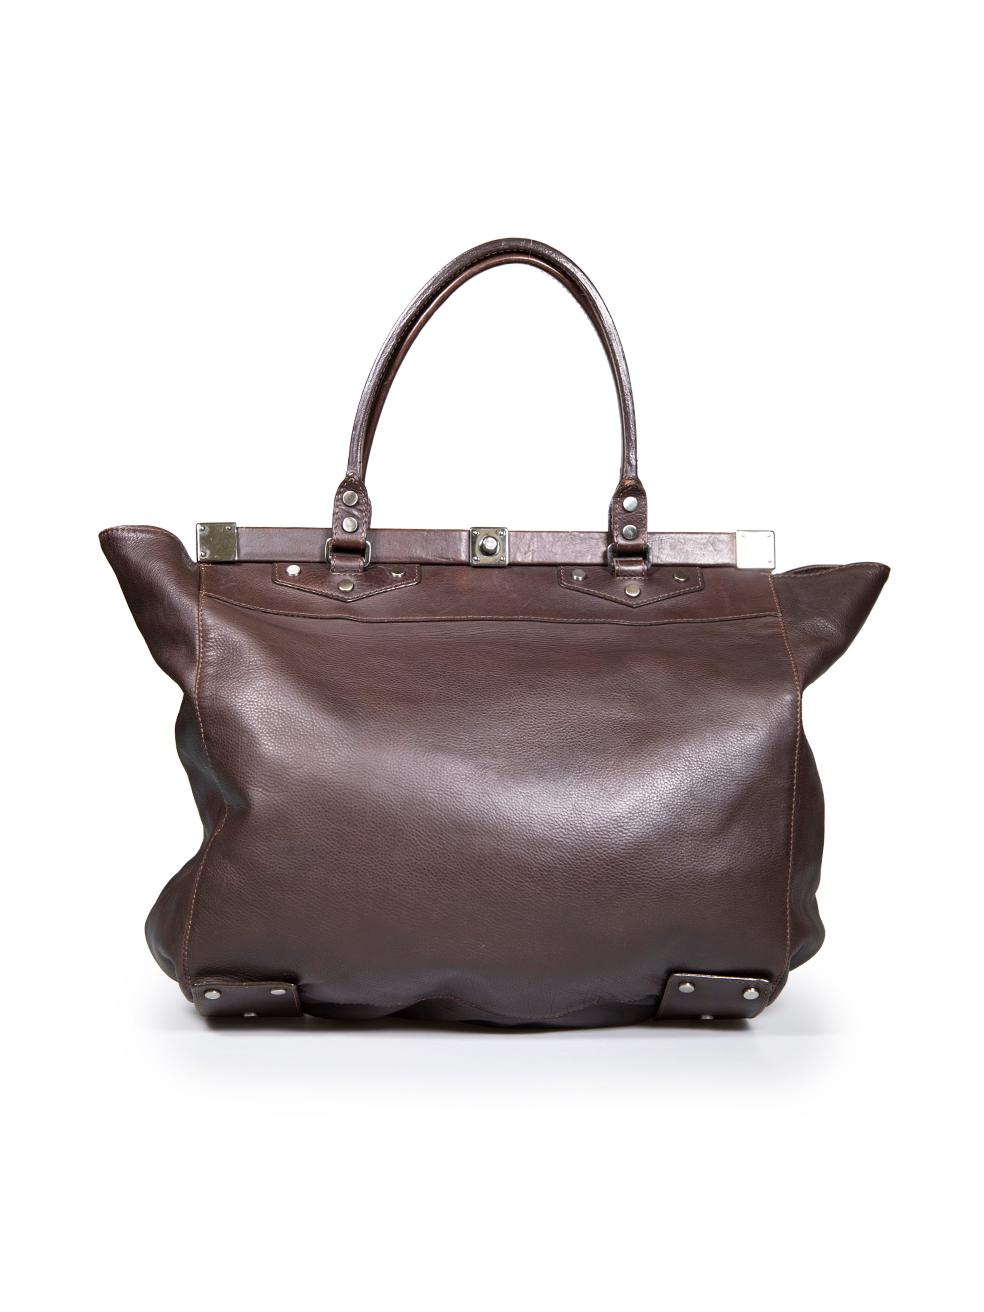 Lanvin Brown Leather Large Tote Bag In Good Condition For Sale In London, GB